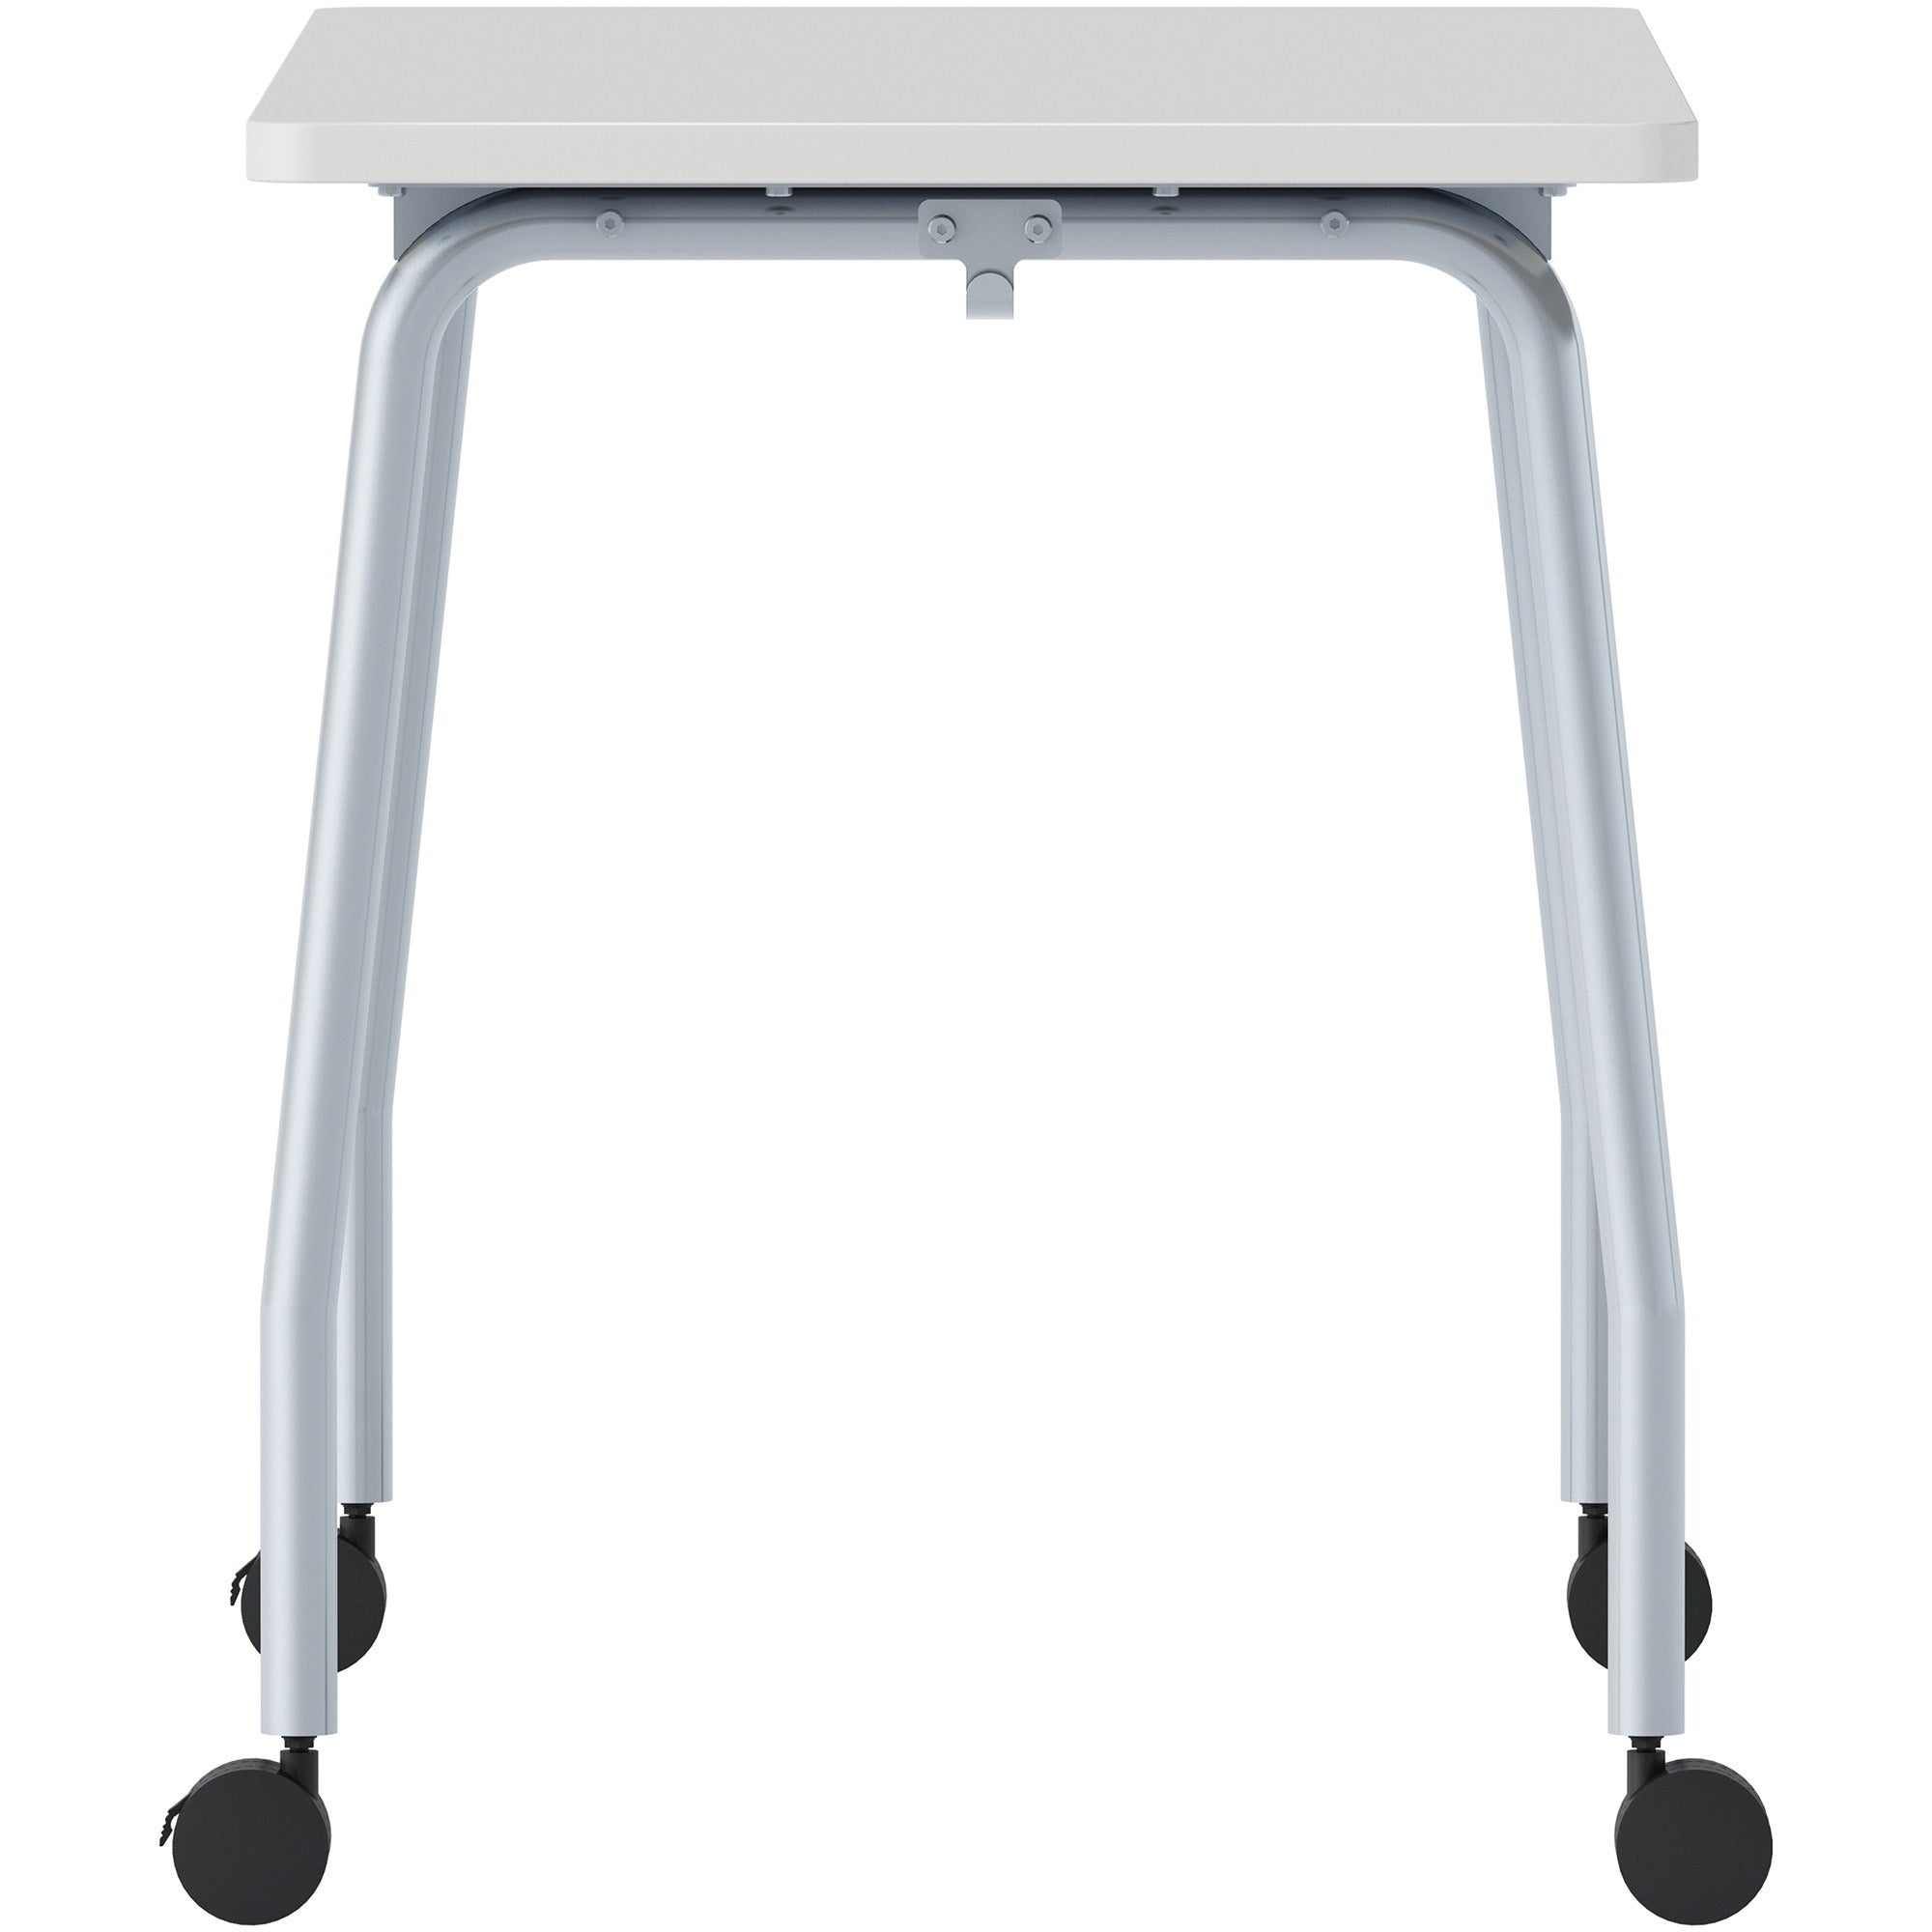 lorell-training-table-for-table-toplaminated-top-300-lb-capacity-2950-table-top-length-x-2363-table-top-width-x-1-table-top-thickness-59-height-assembly-required-gray-particleboard-top-material-1-each_llr60848 - 5